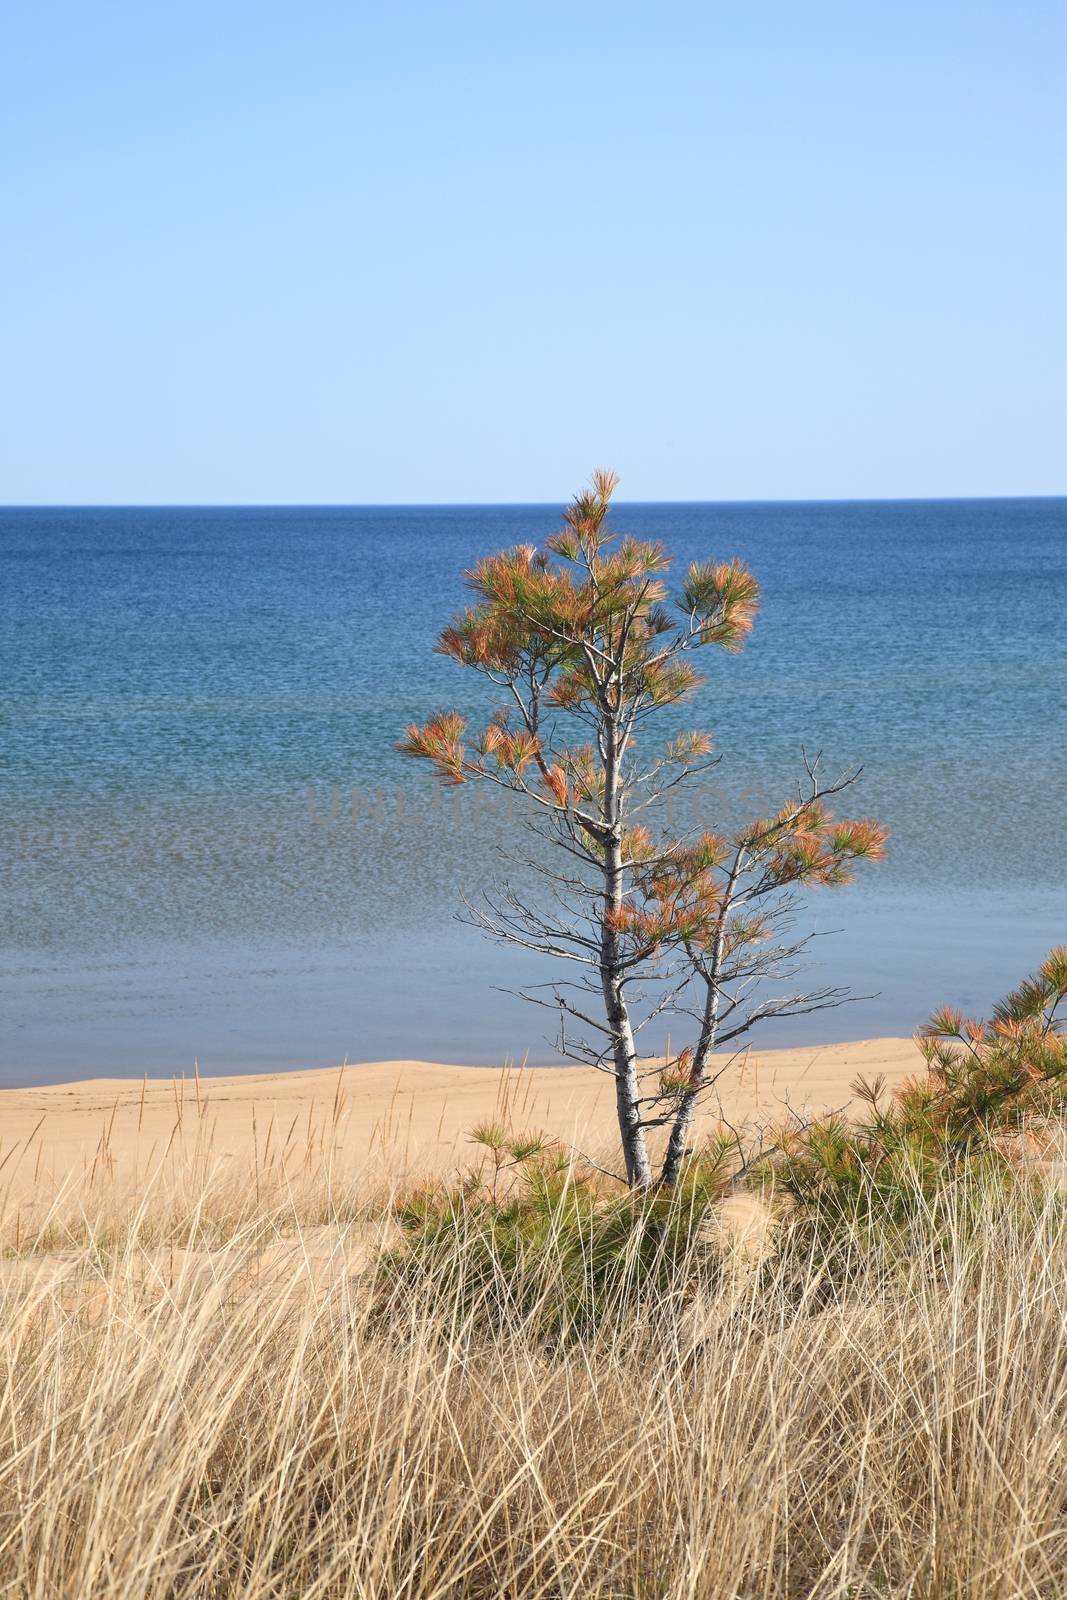 Grassy and sandy shoreline and beach of a North American Great Lake Superior in Michigan.